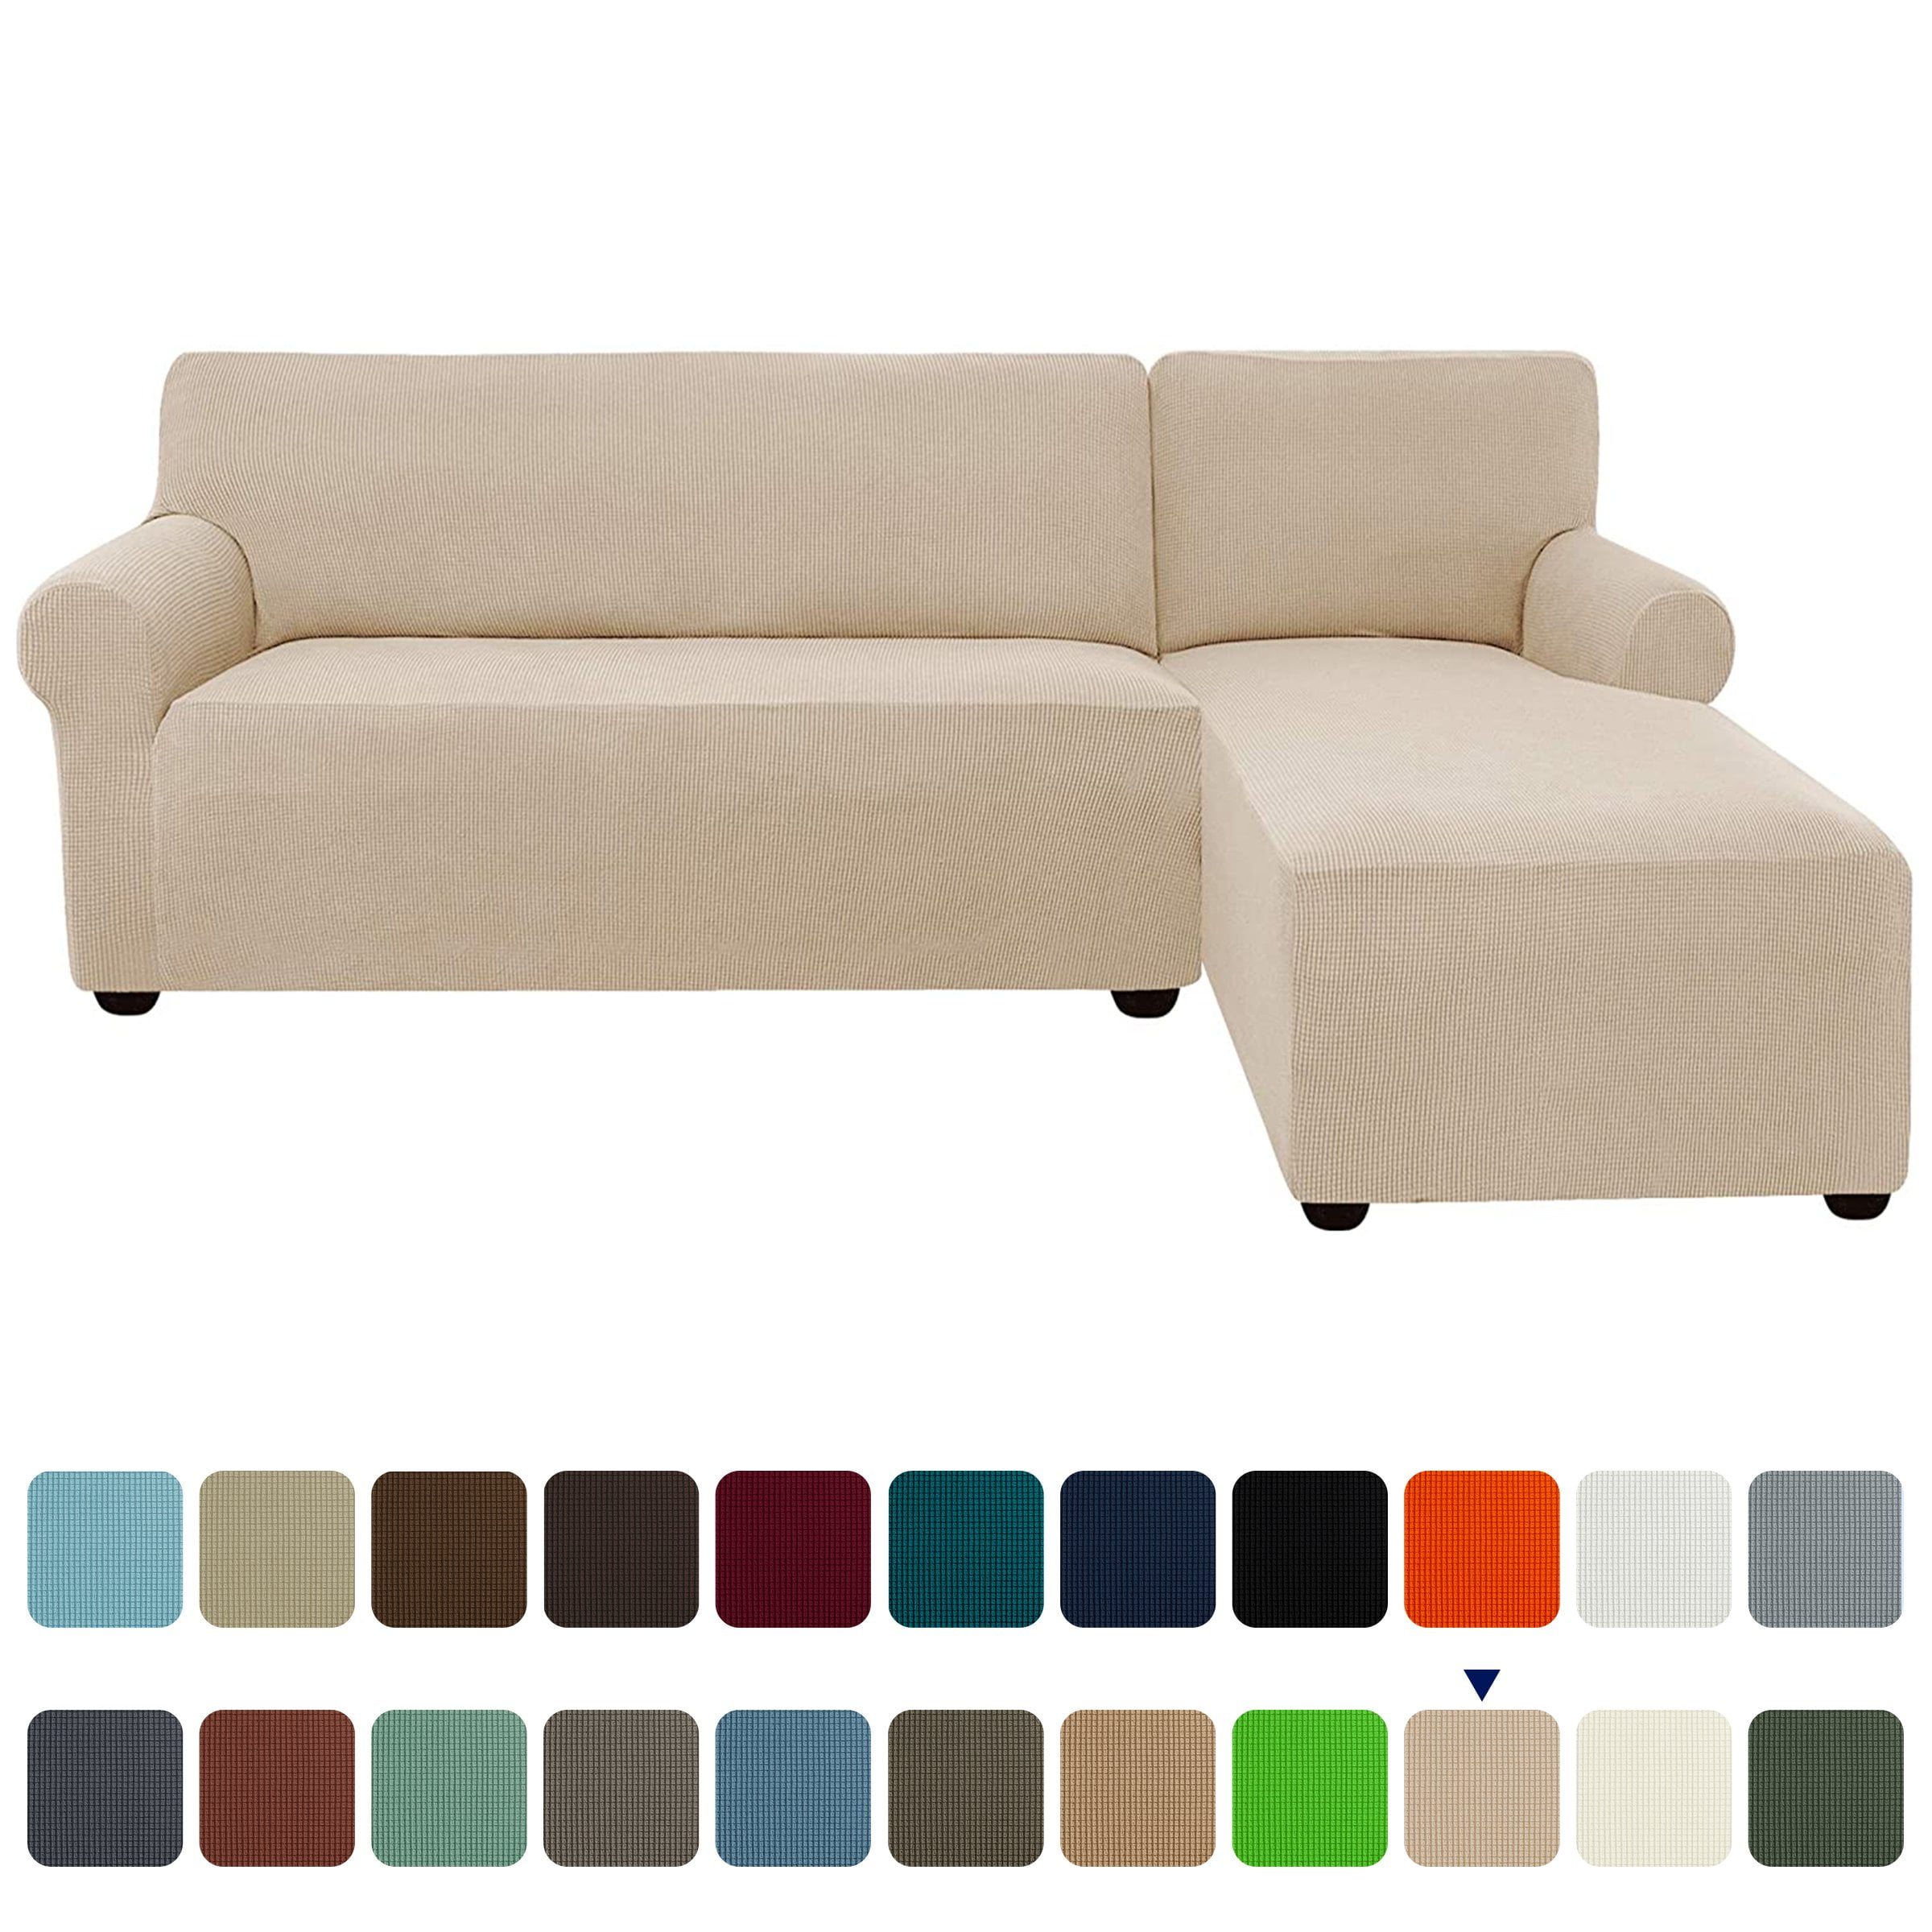 Details about  / 1-4 Seat Waterproof Leather Sofa Seat Cover Stretch Cushion Slipcover Protector